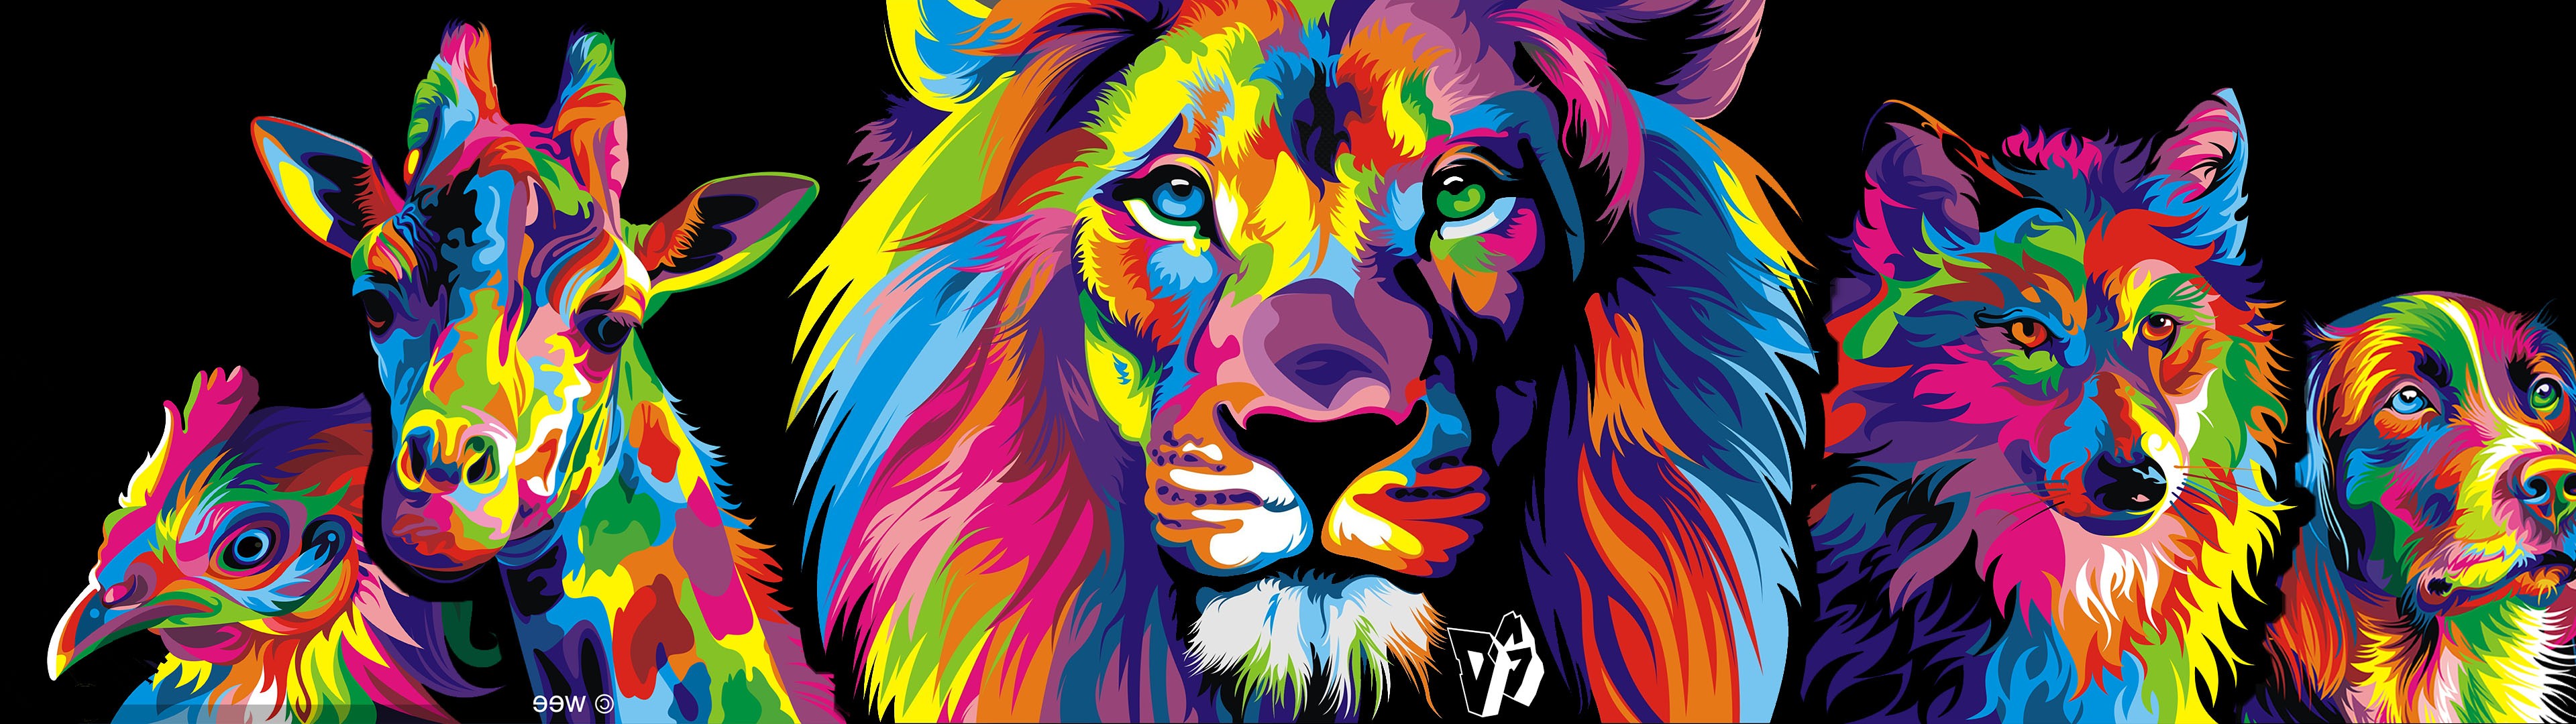 colorful, animals, giraffes, lion, dog, wolf, multiple display, chickens, ART, color, psychedelic art Gallery HD Wallpaper